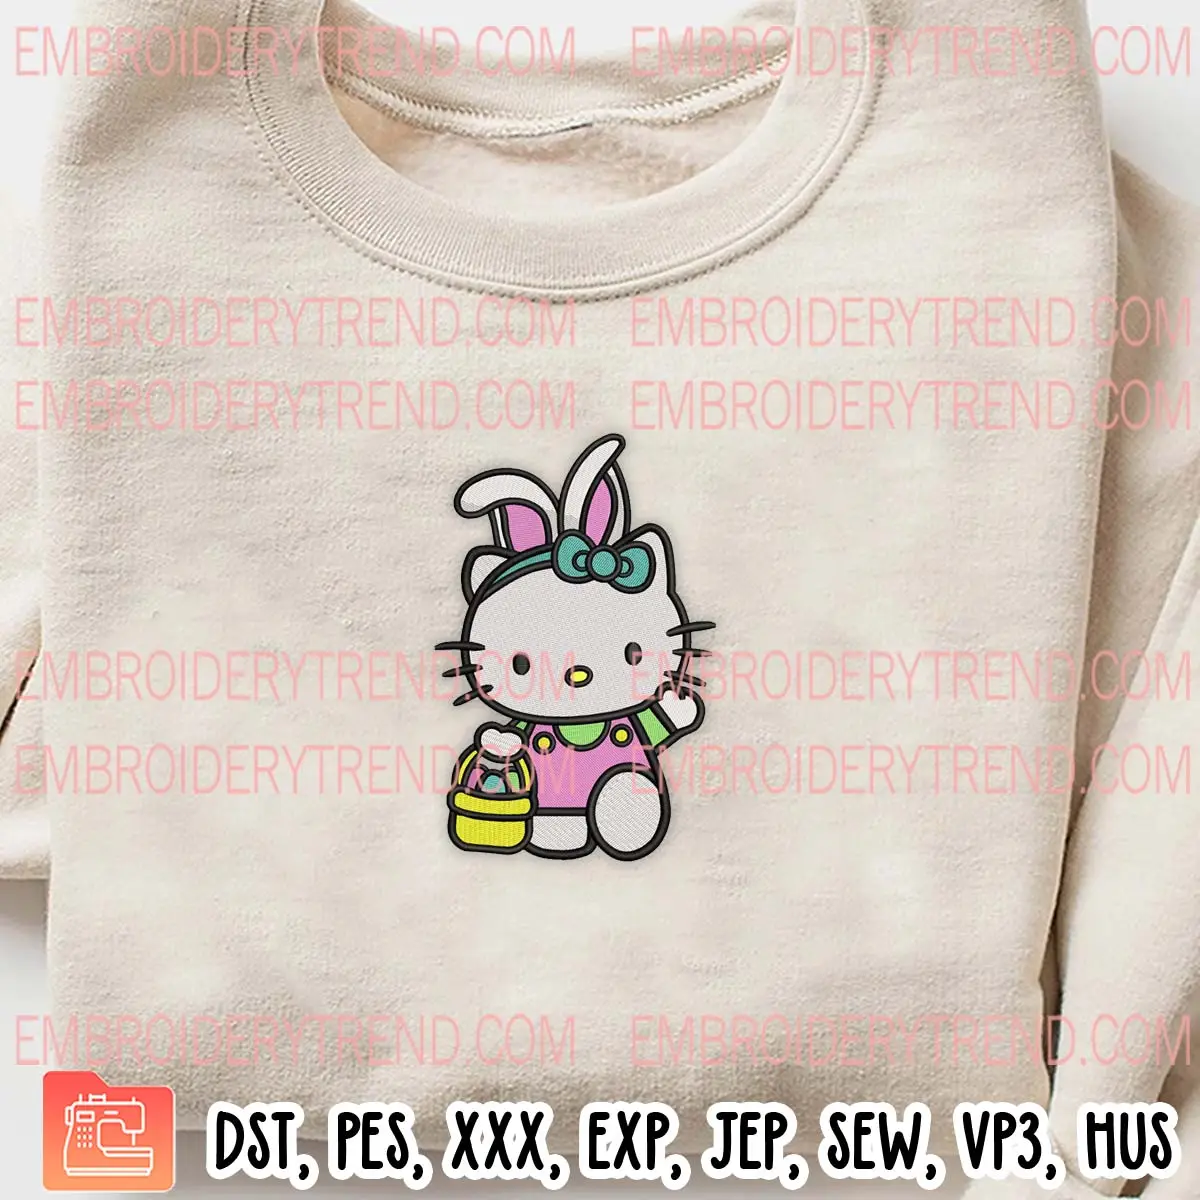 Hello Kitty with Easter Egg Basket Embroidery Design, Kitty Bunny Embroidery Digitizing Pes File